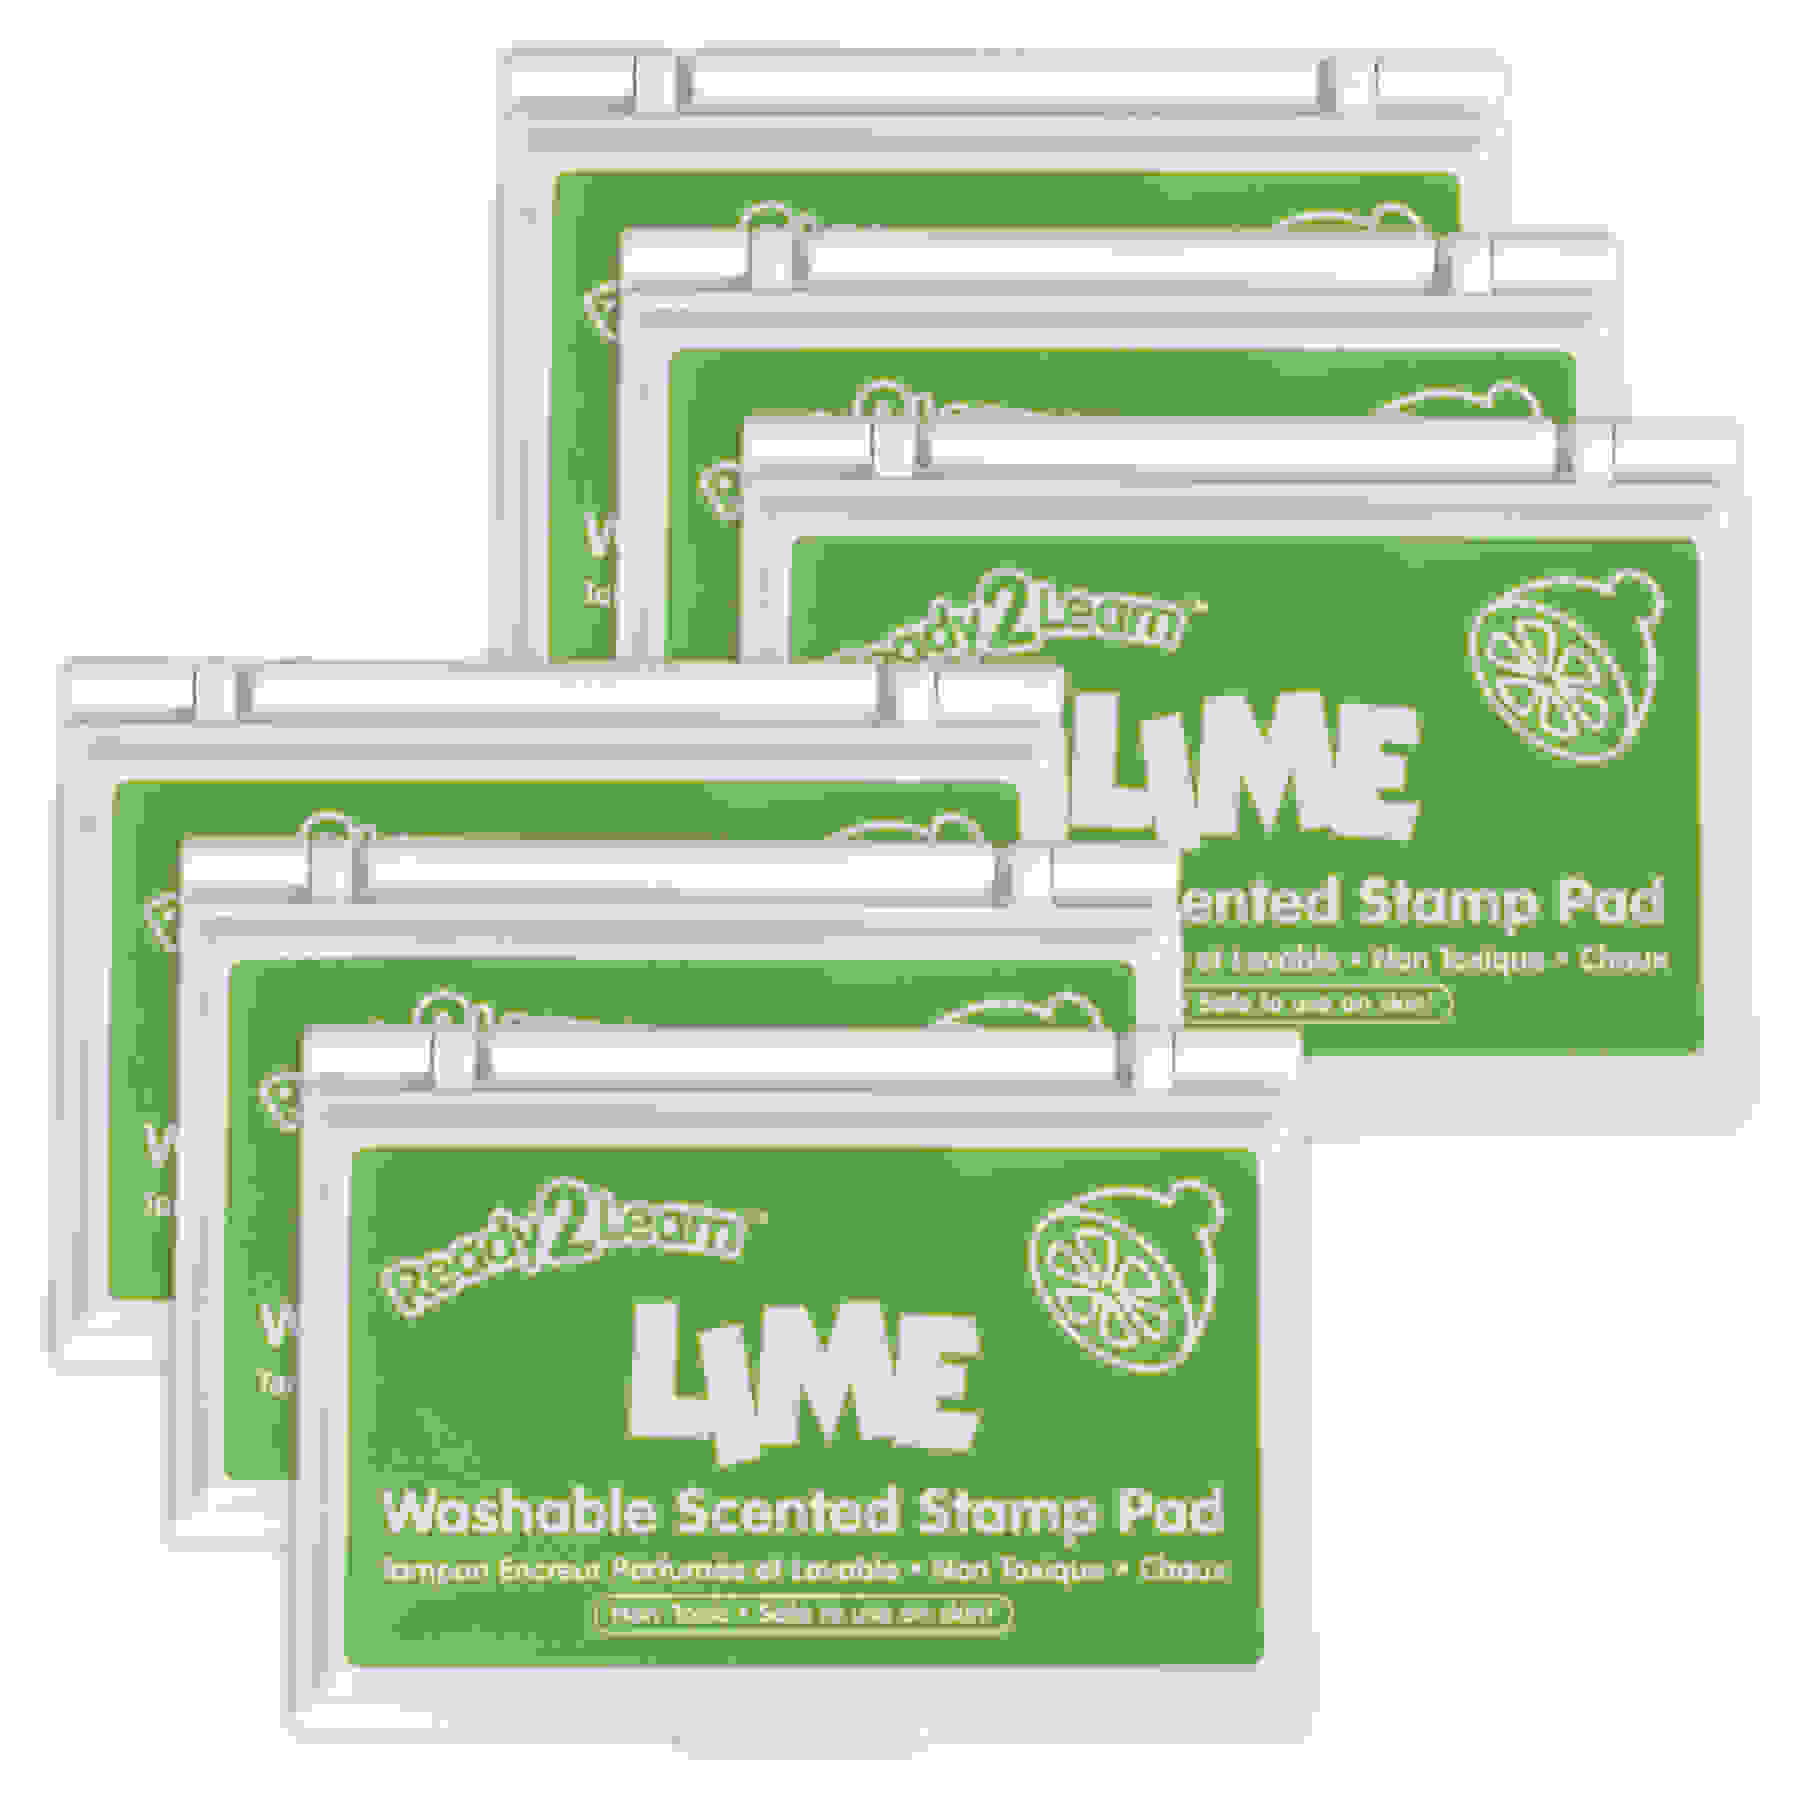 Washable Stamp Pad - Lime Scent, Green - Pack of 6